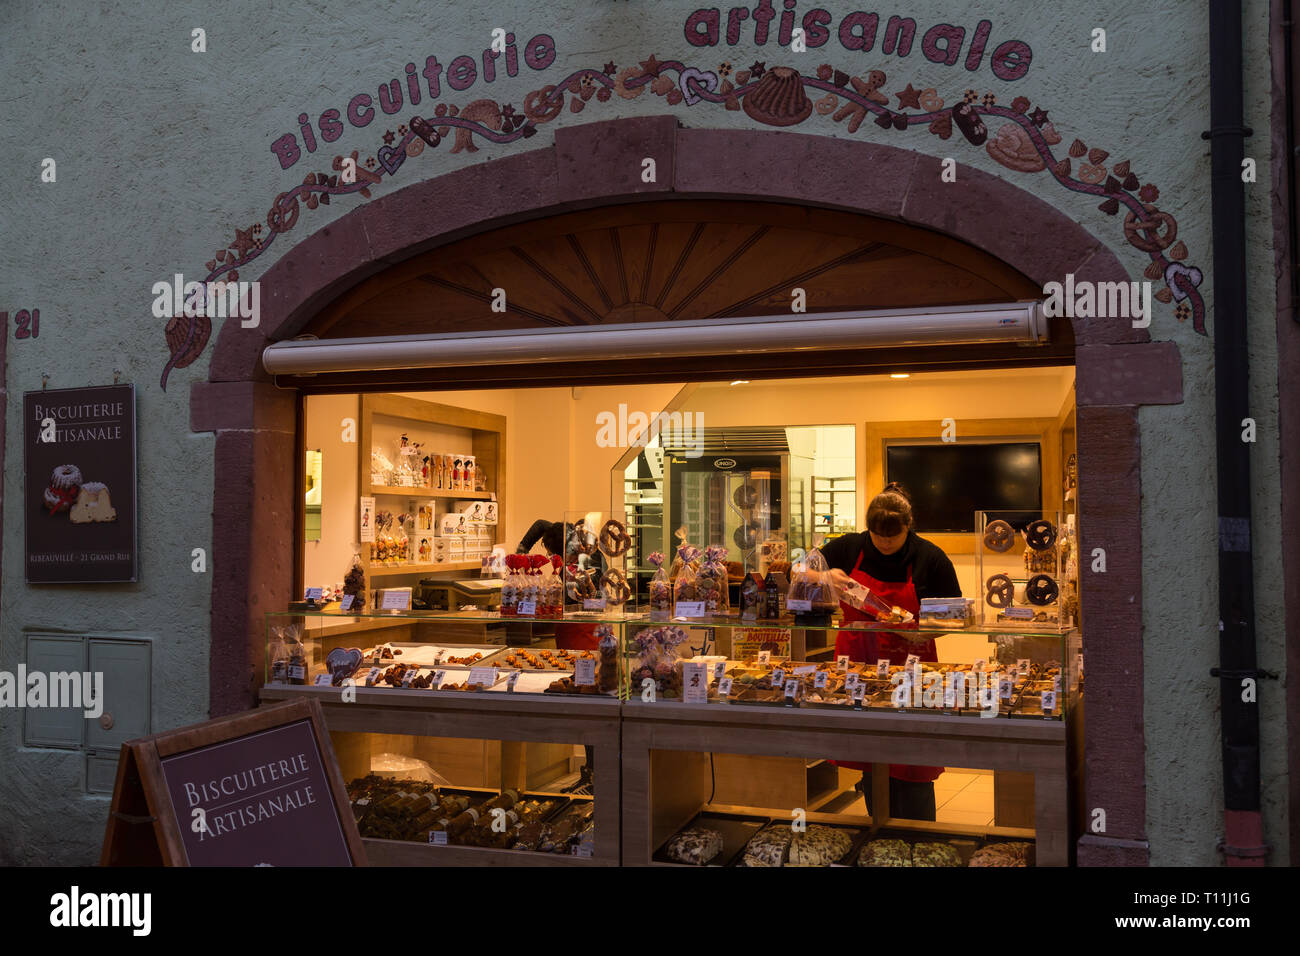 29.10.2014, Ribeauville, Grand Est, France - Pastry shop (biscuiterie) in Alsace. Ribeauville is a charming place on the wine road in the Vosges mount Stock Photo